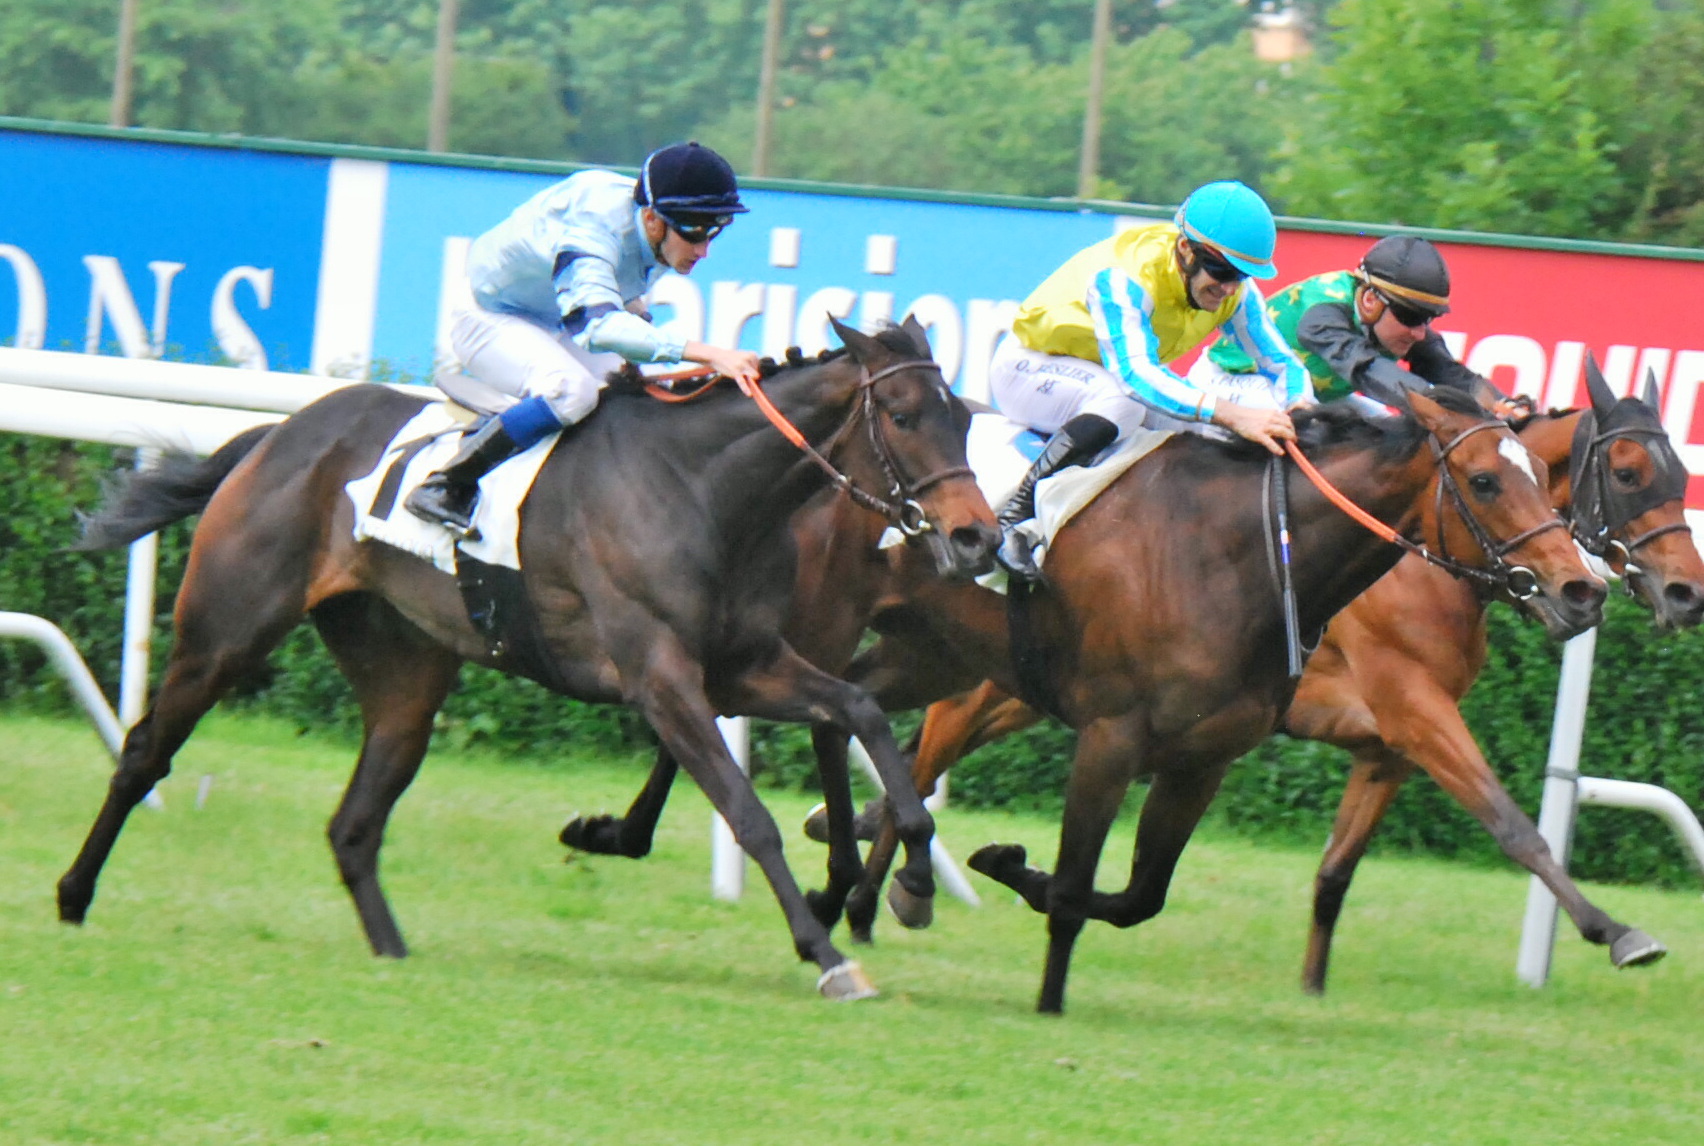 Fast-finishing Luminate (Aurelian Lemaitre, left) can’t quite get on terms with winner Castellar (Olivier Peslier, centre) in the Prix Cleopatre at Saint-Cloud last month. Luminate was later disqualified and placed fifth, with Amazing Lips (far side), who crossed the line third, promoted to second. Photo: John Gilmore